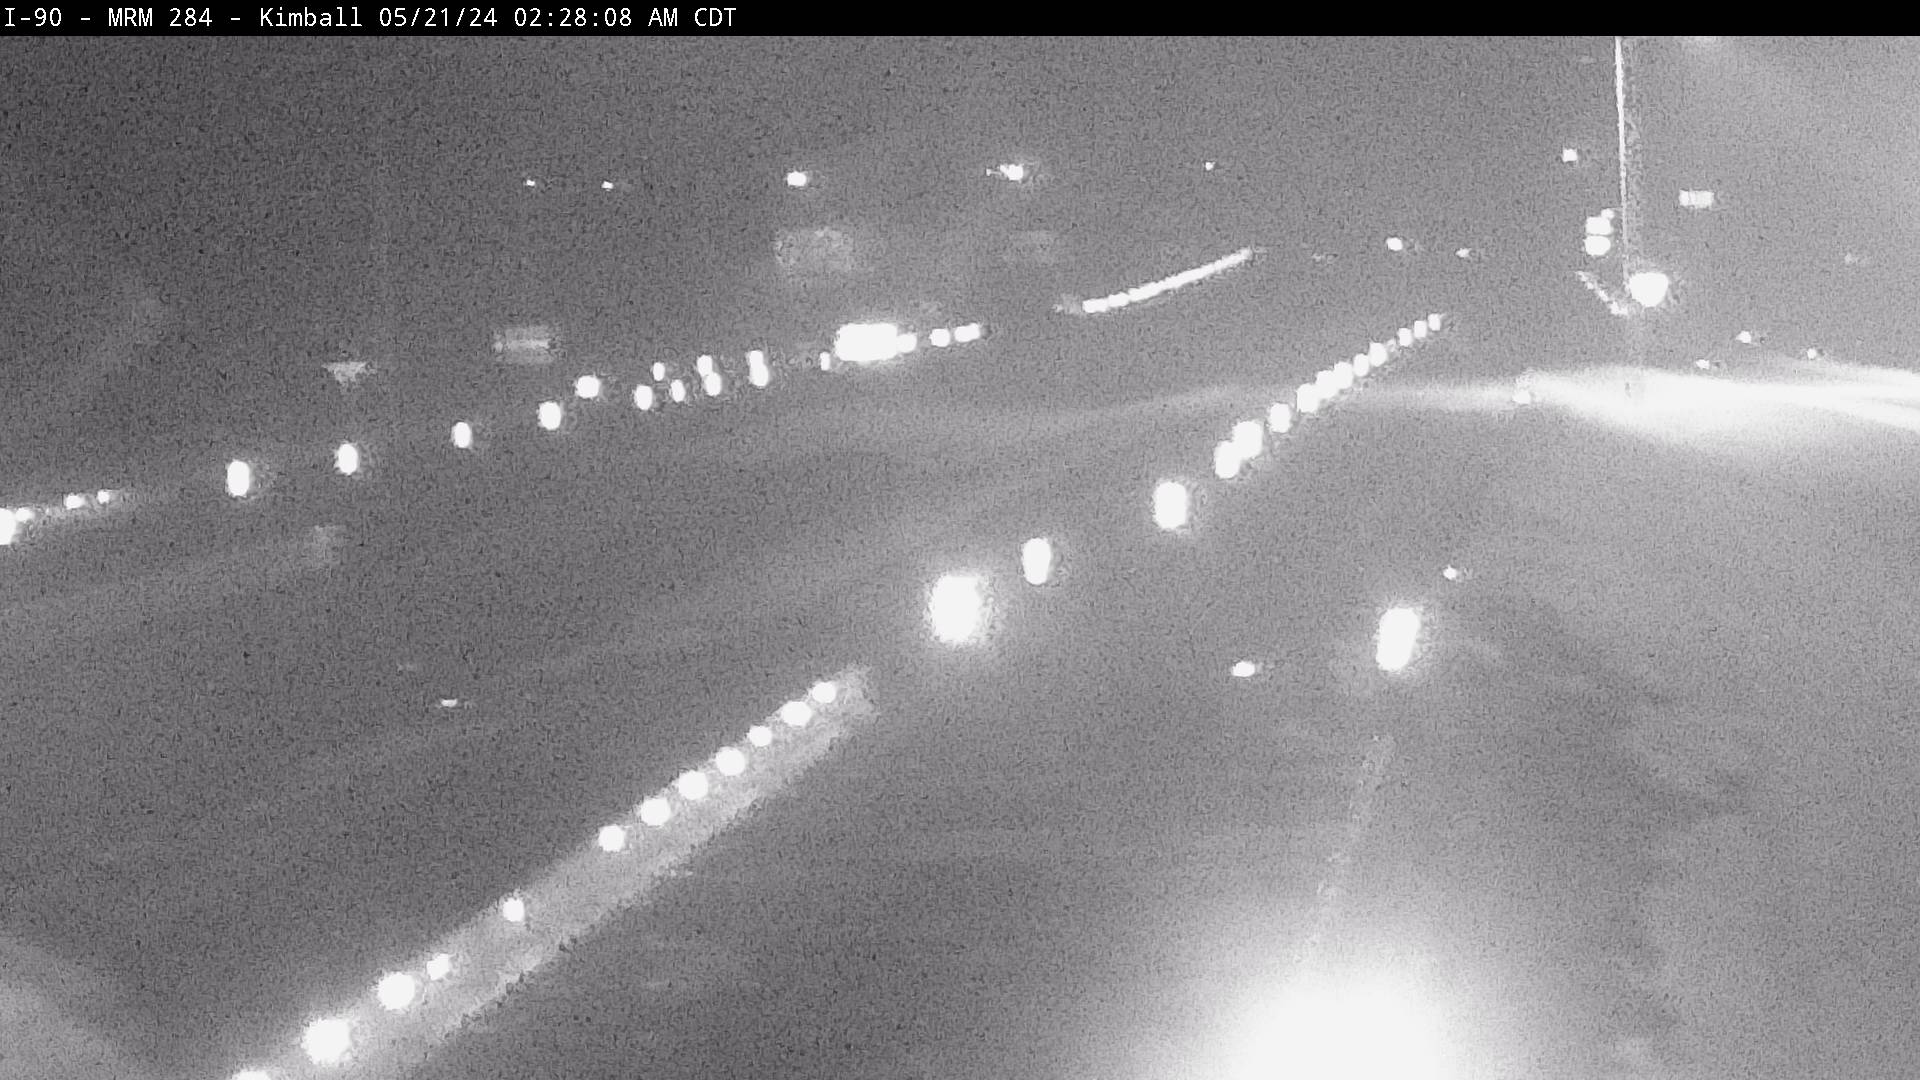 South of town along I-90 @ MP 284 - East Traffic Camera